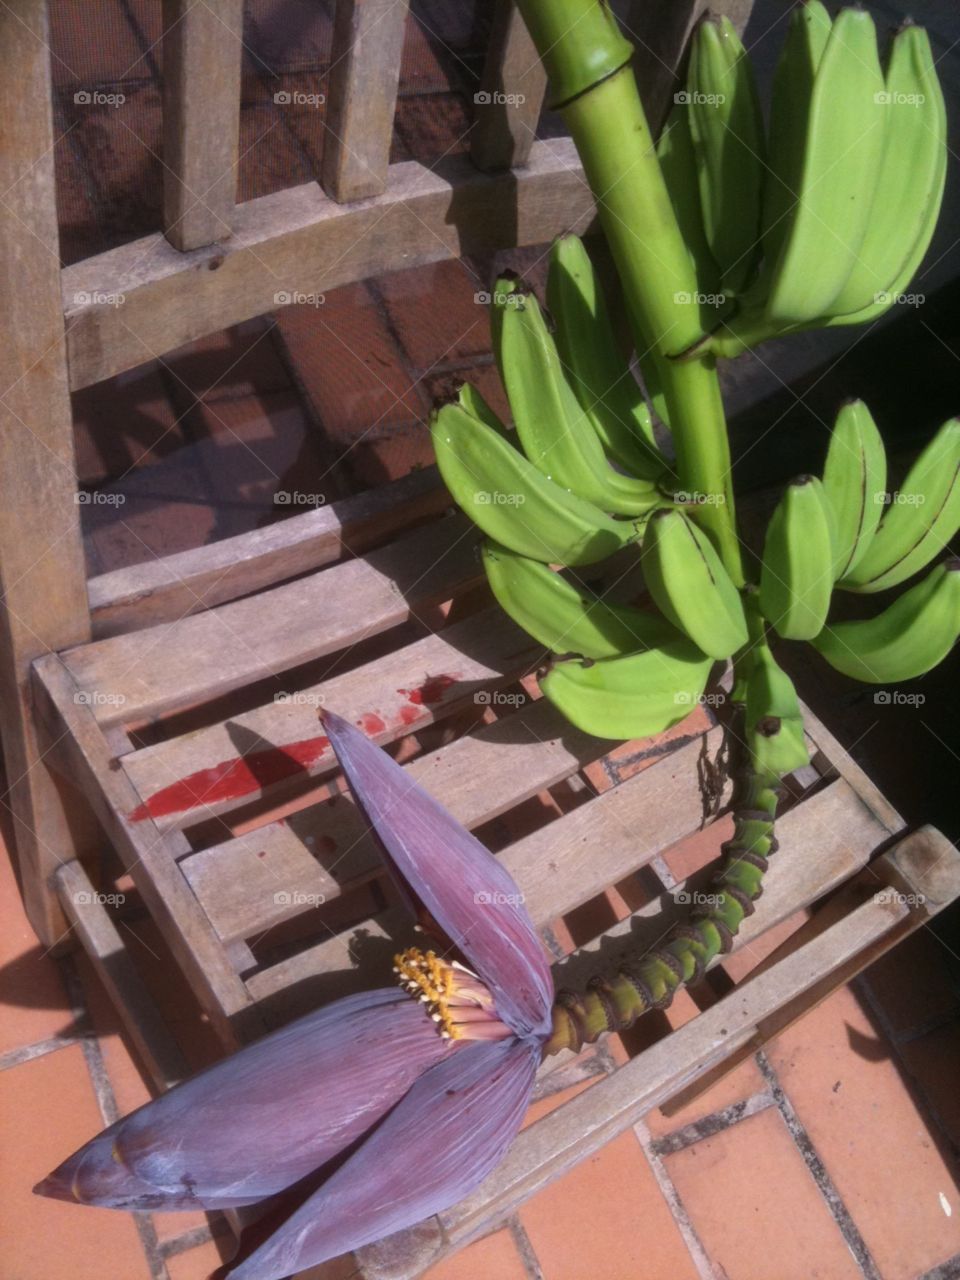 Banana stalk with purple flower on an old wooden chair. 